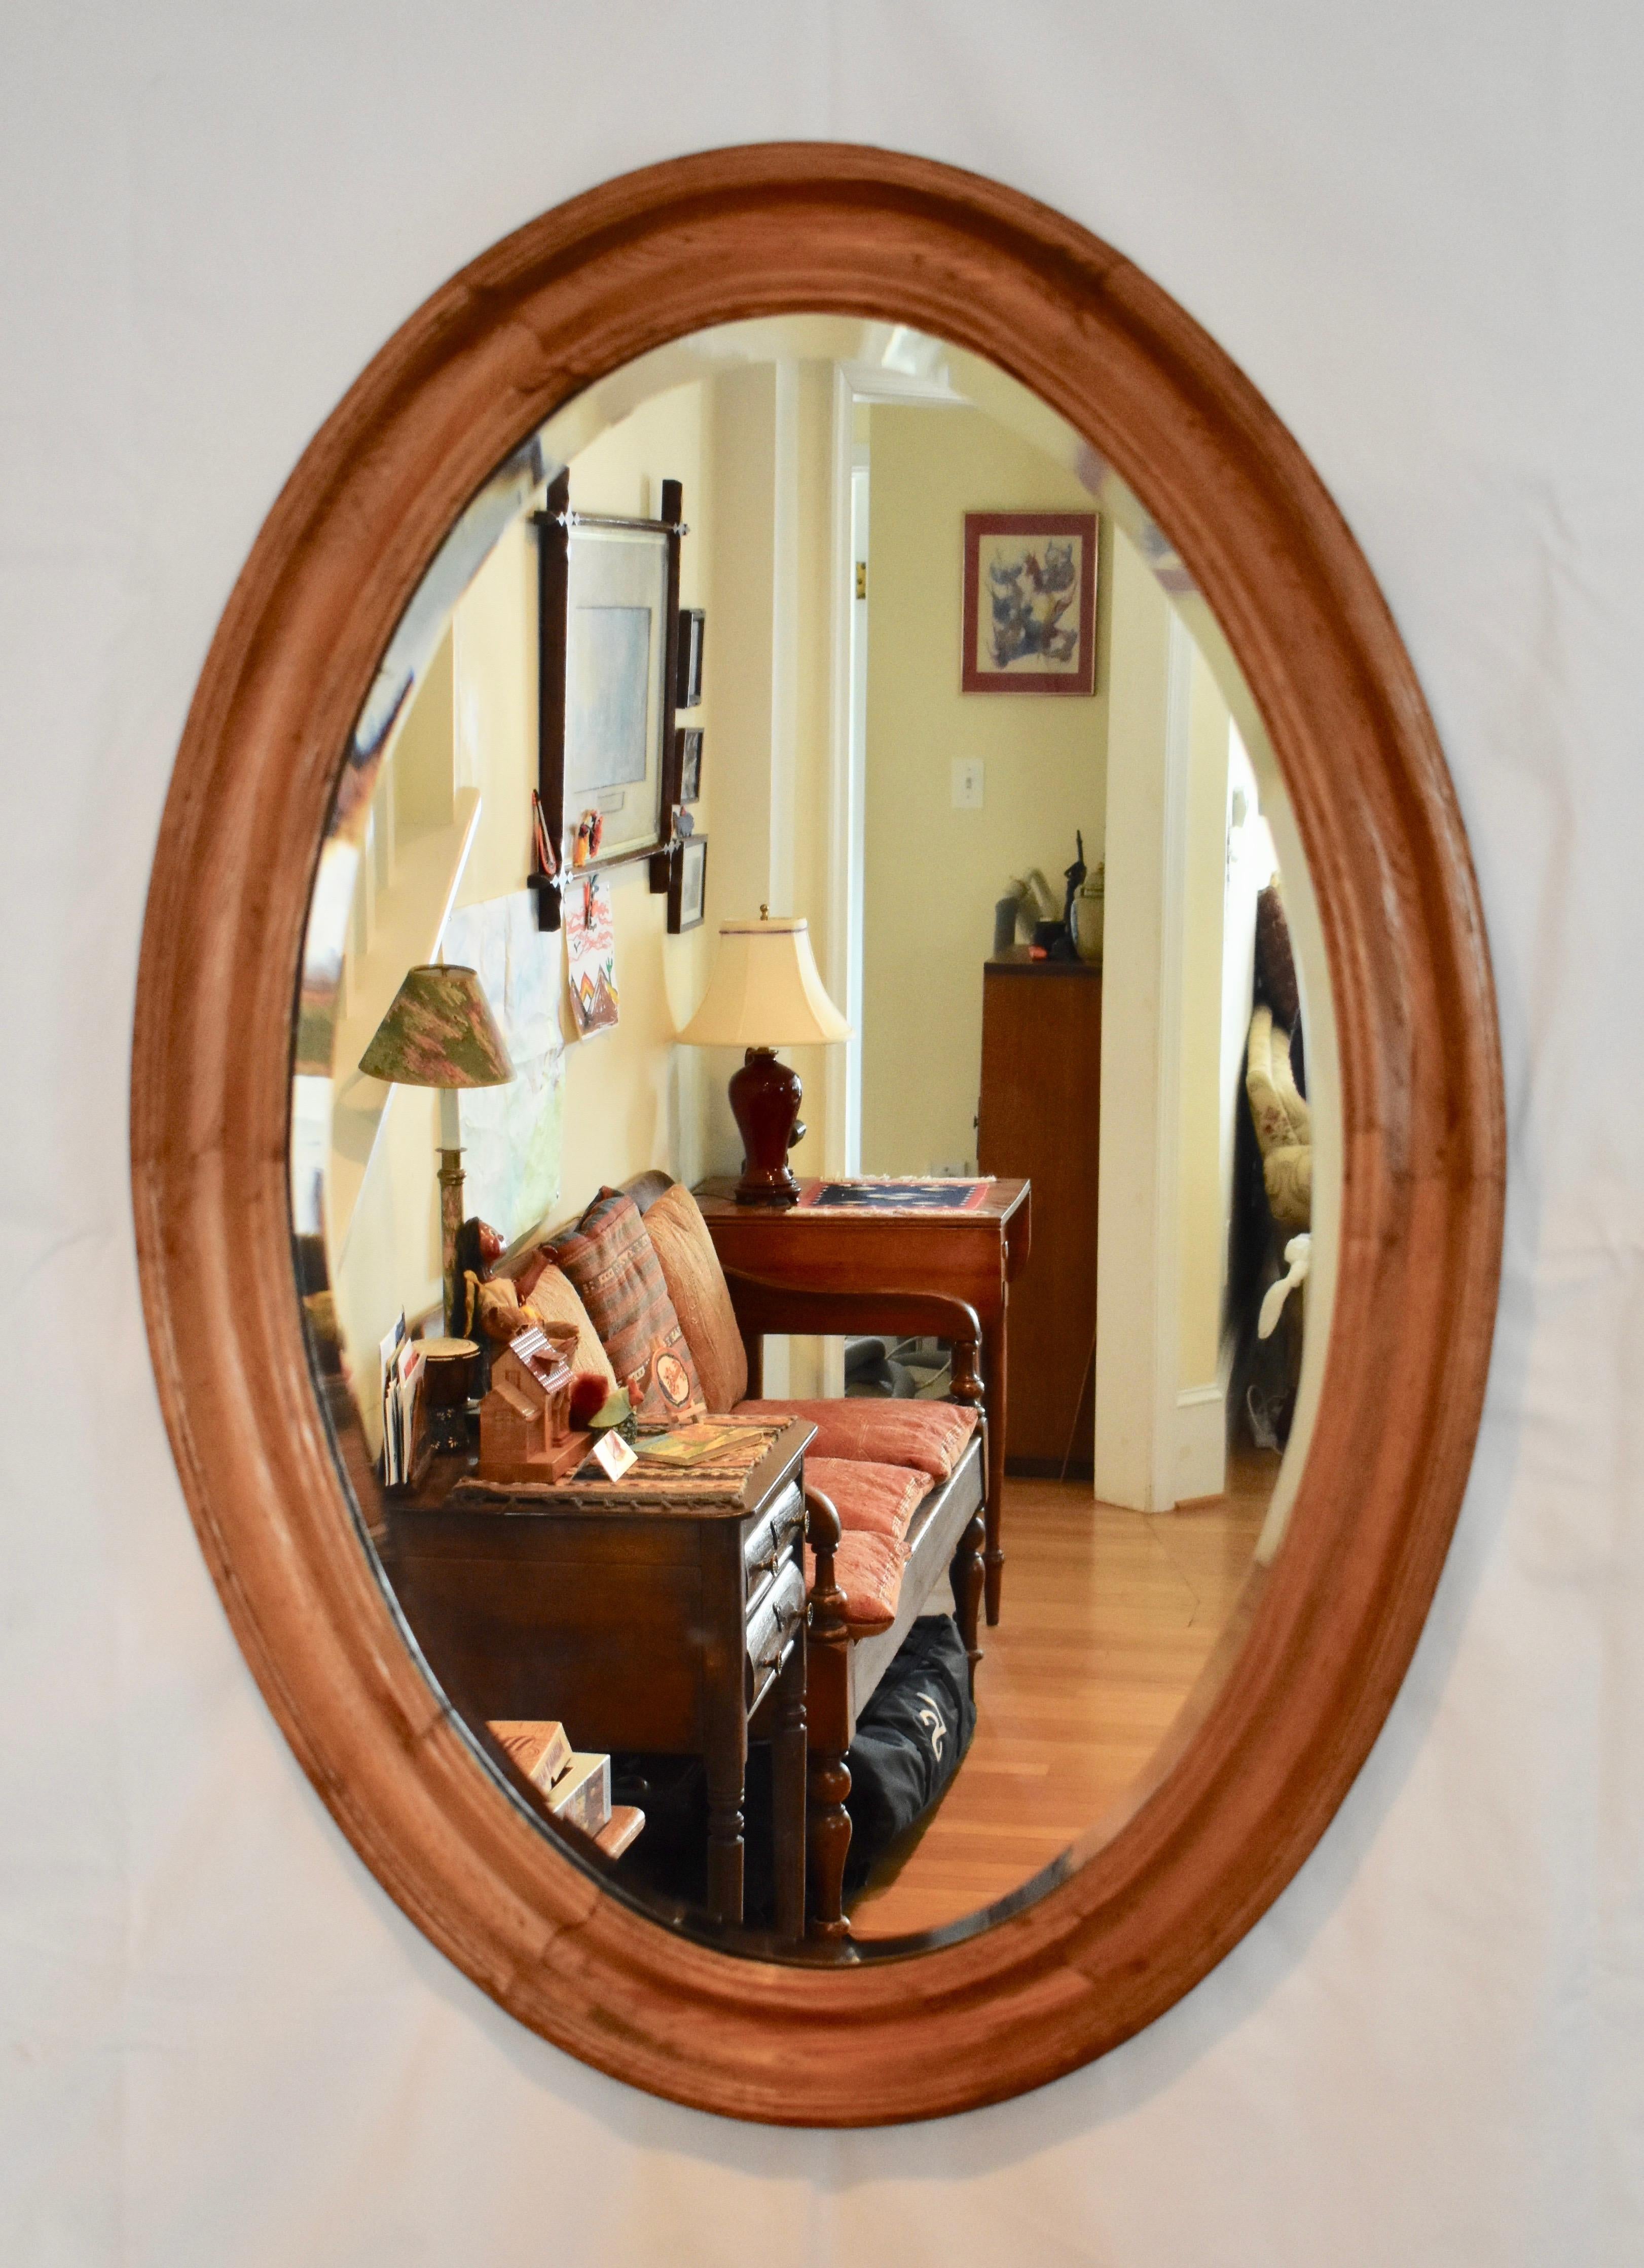 It is rare to find an oval antique English pine mirror with original glass. This nice example has a strong grain pattern and a beautifully contoured frame molding. It is perfectly suited for use in the bedroom, bathroom, or hallway.

  